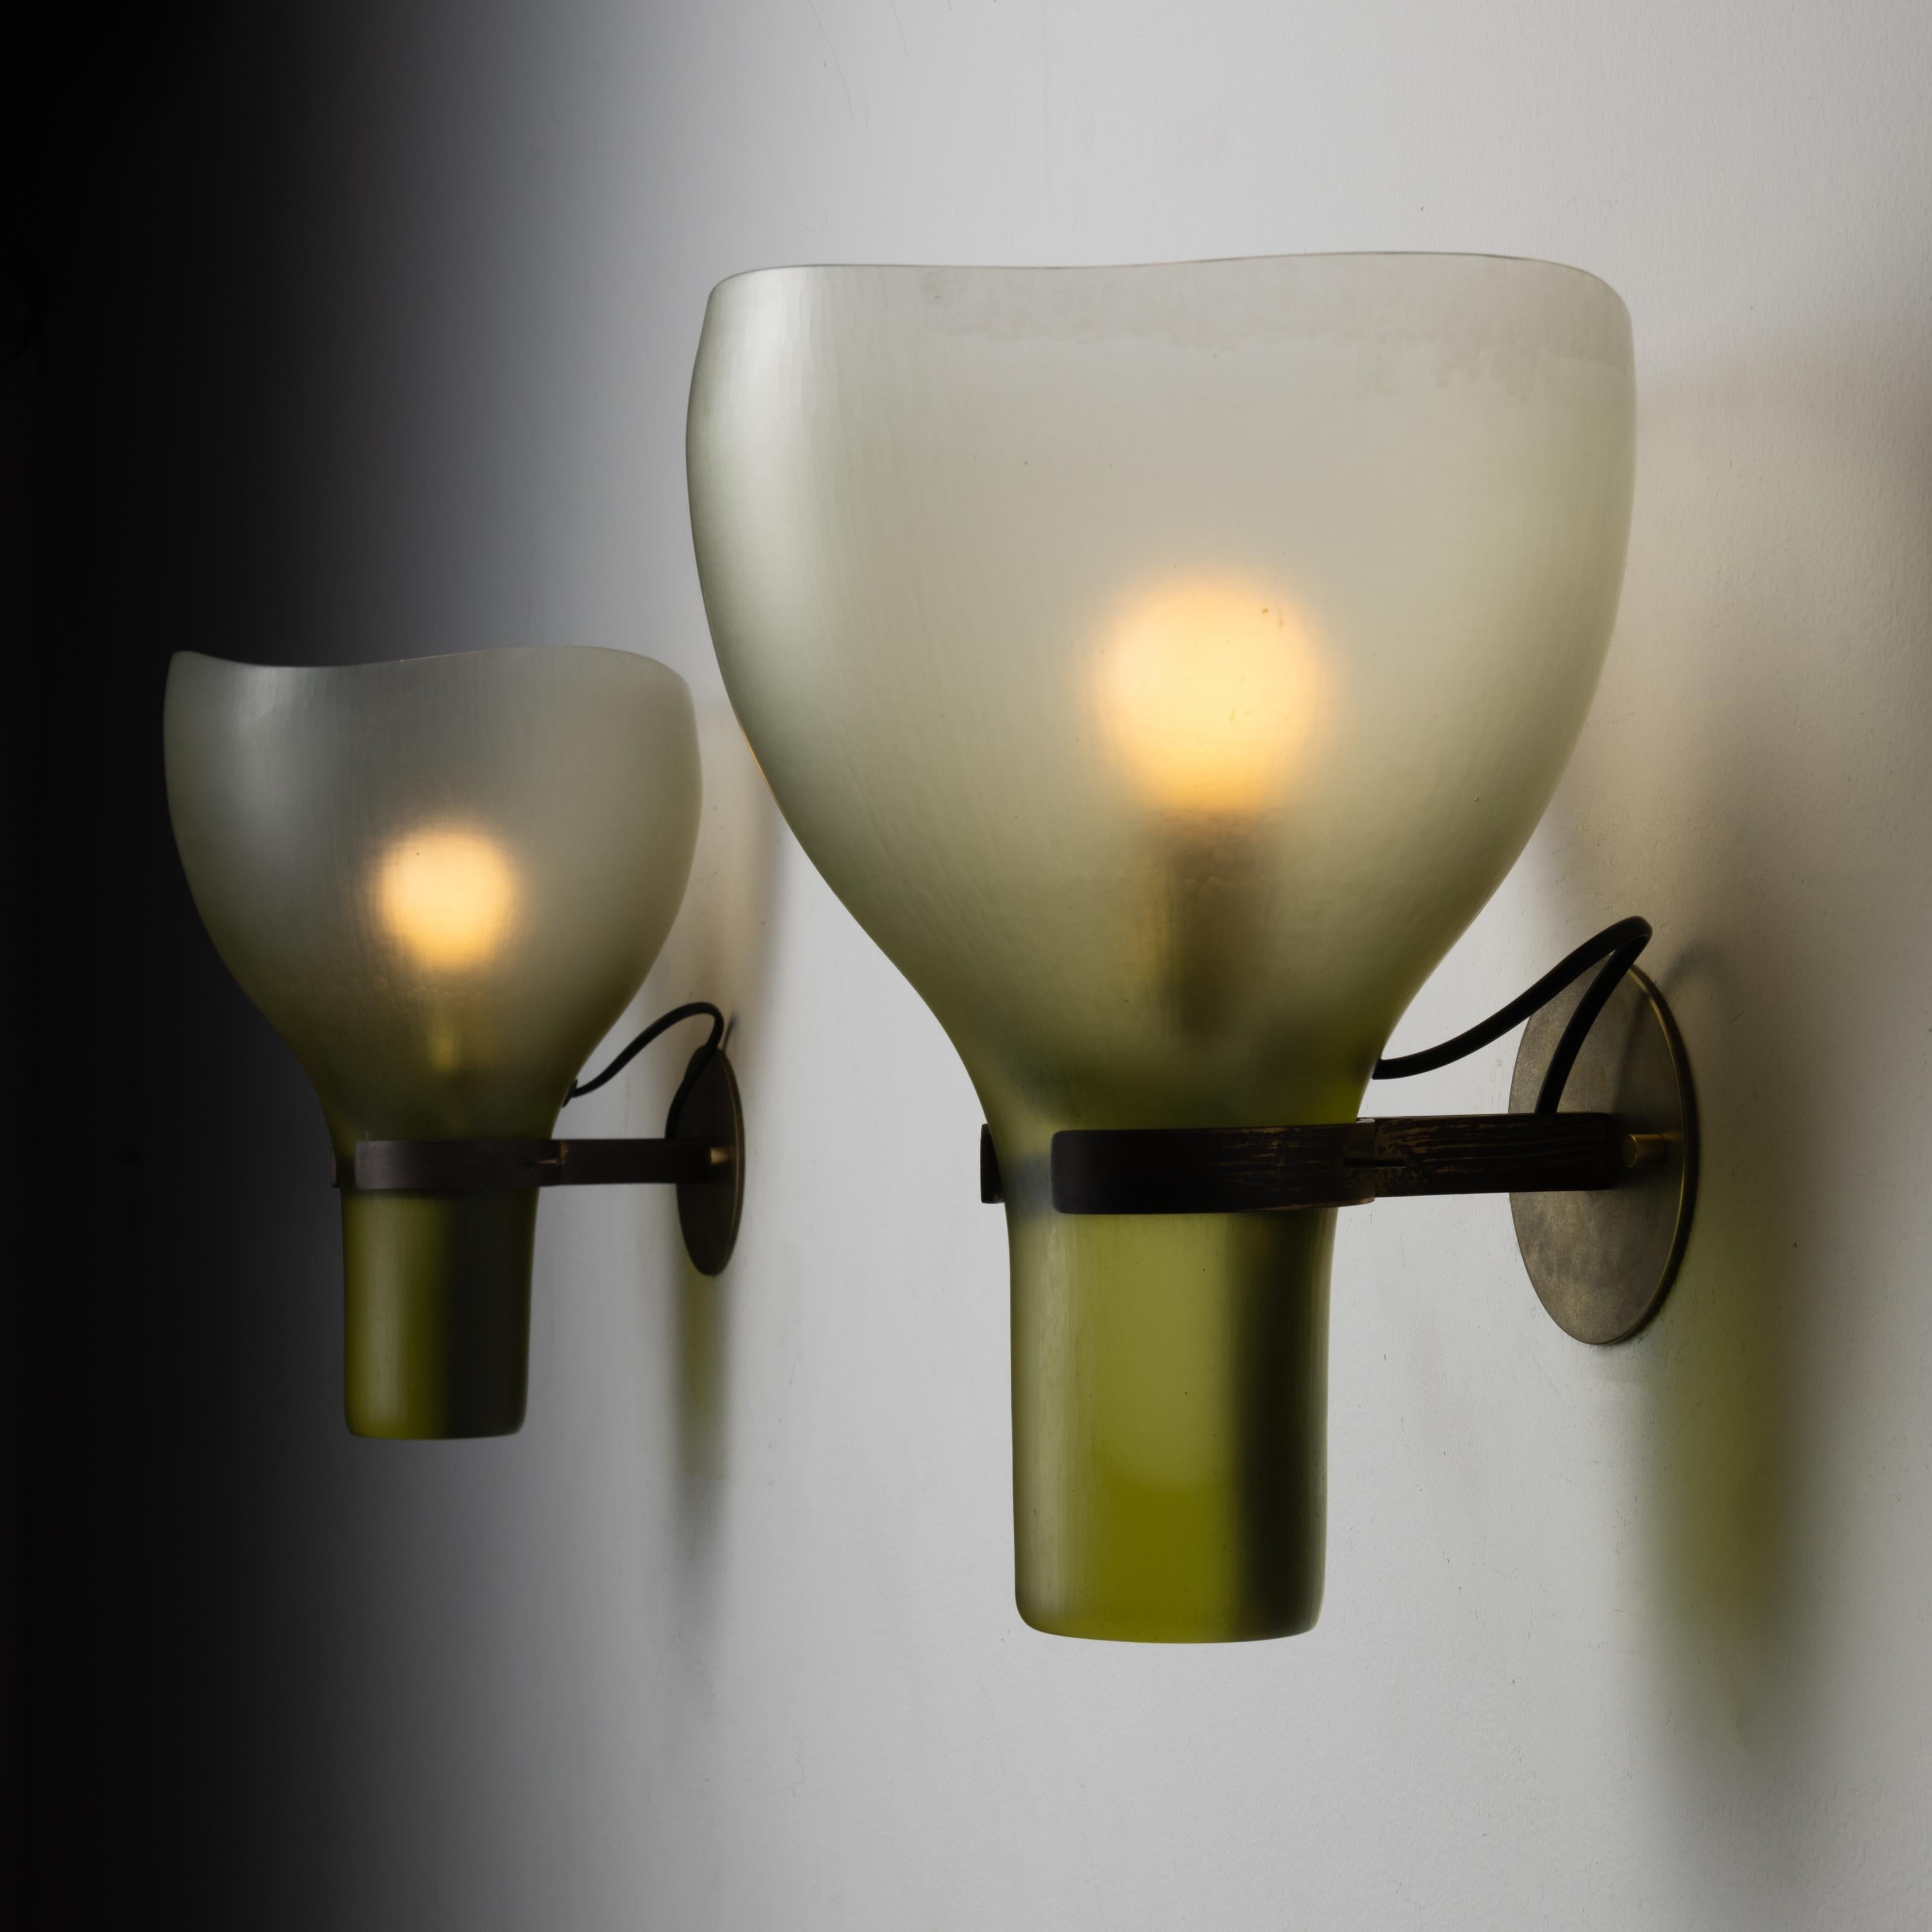 Italian Pair of Sconces by Tobia Scarpa for Venini